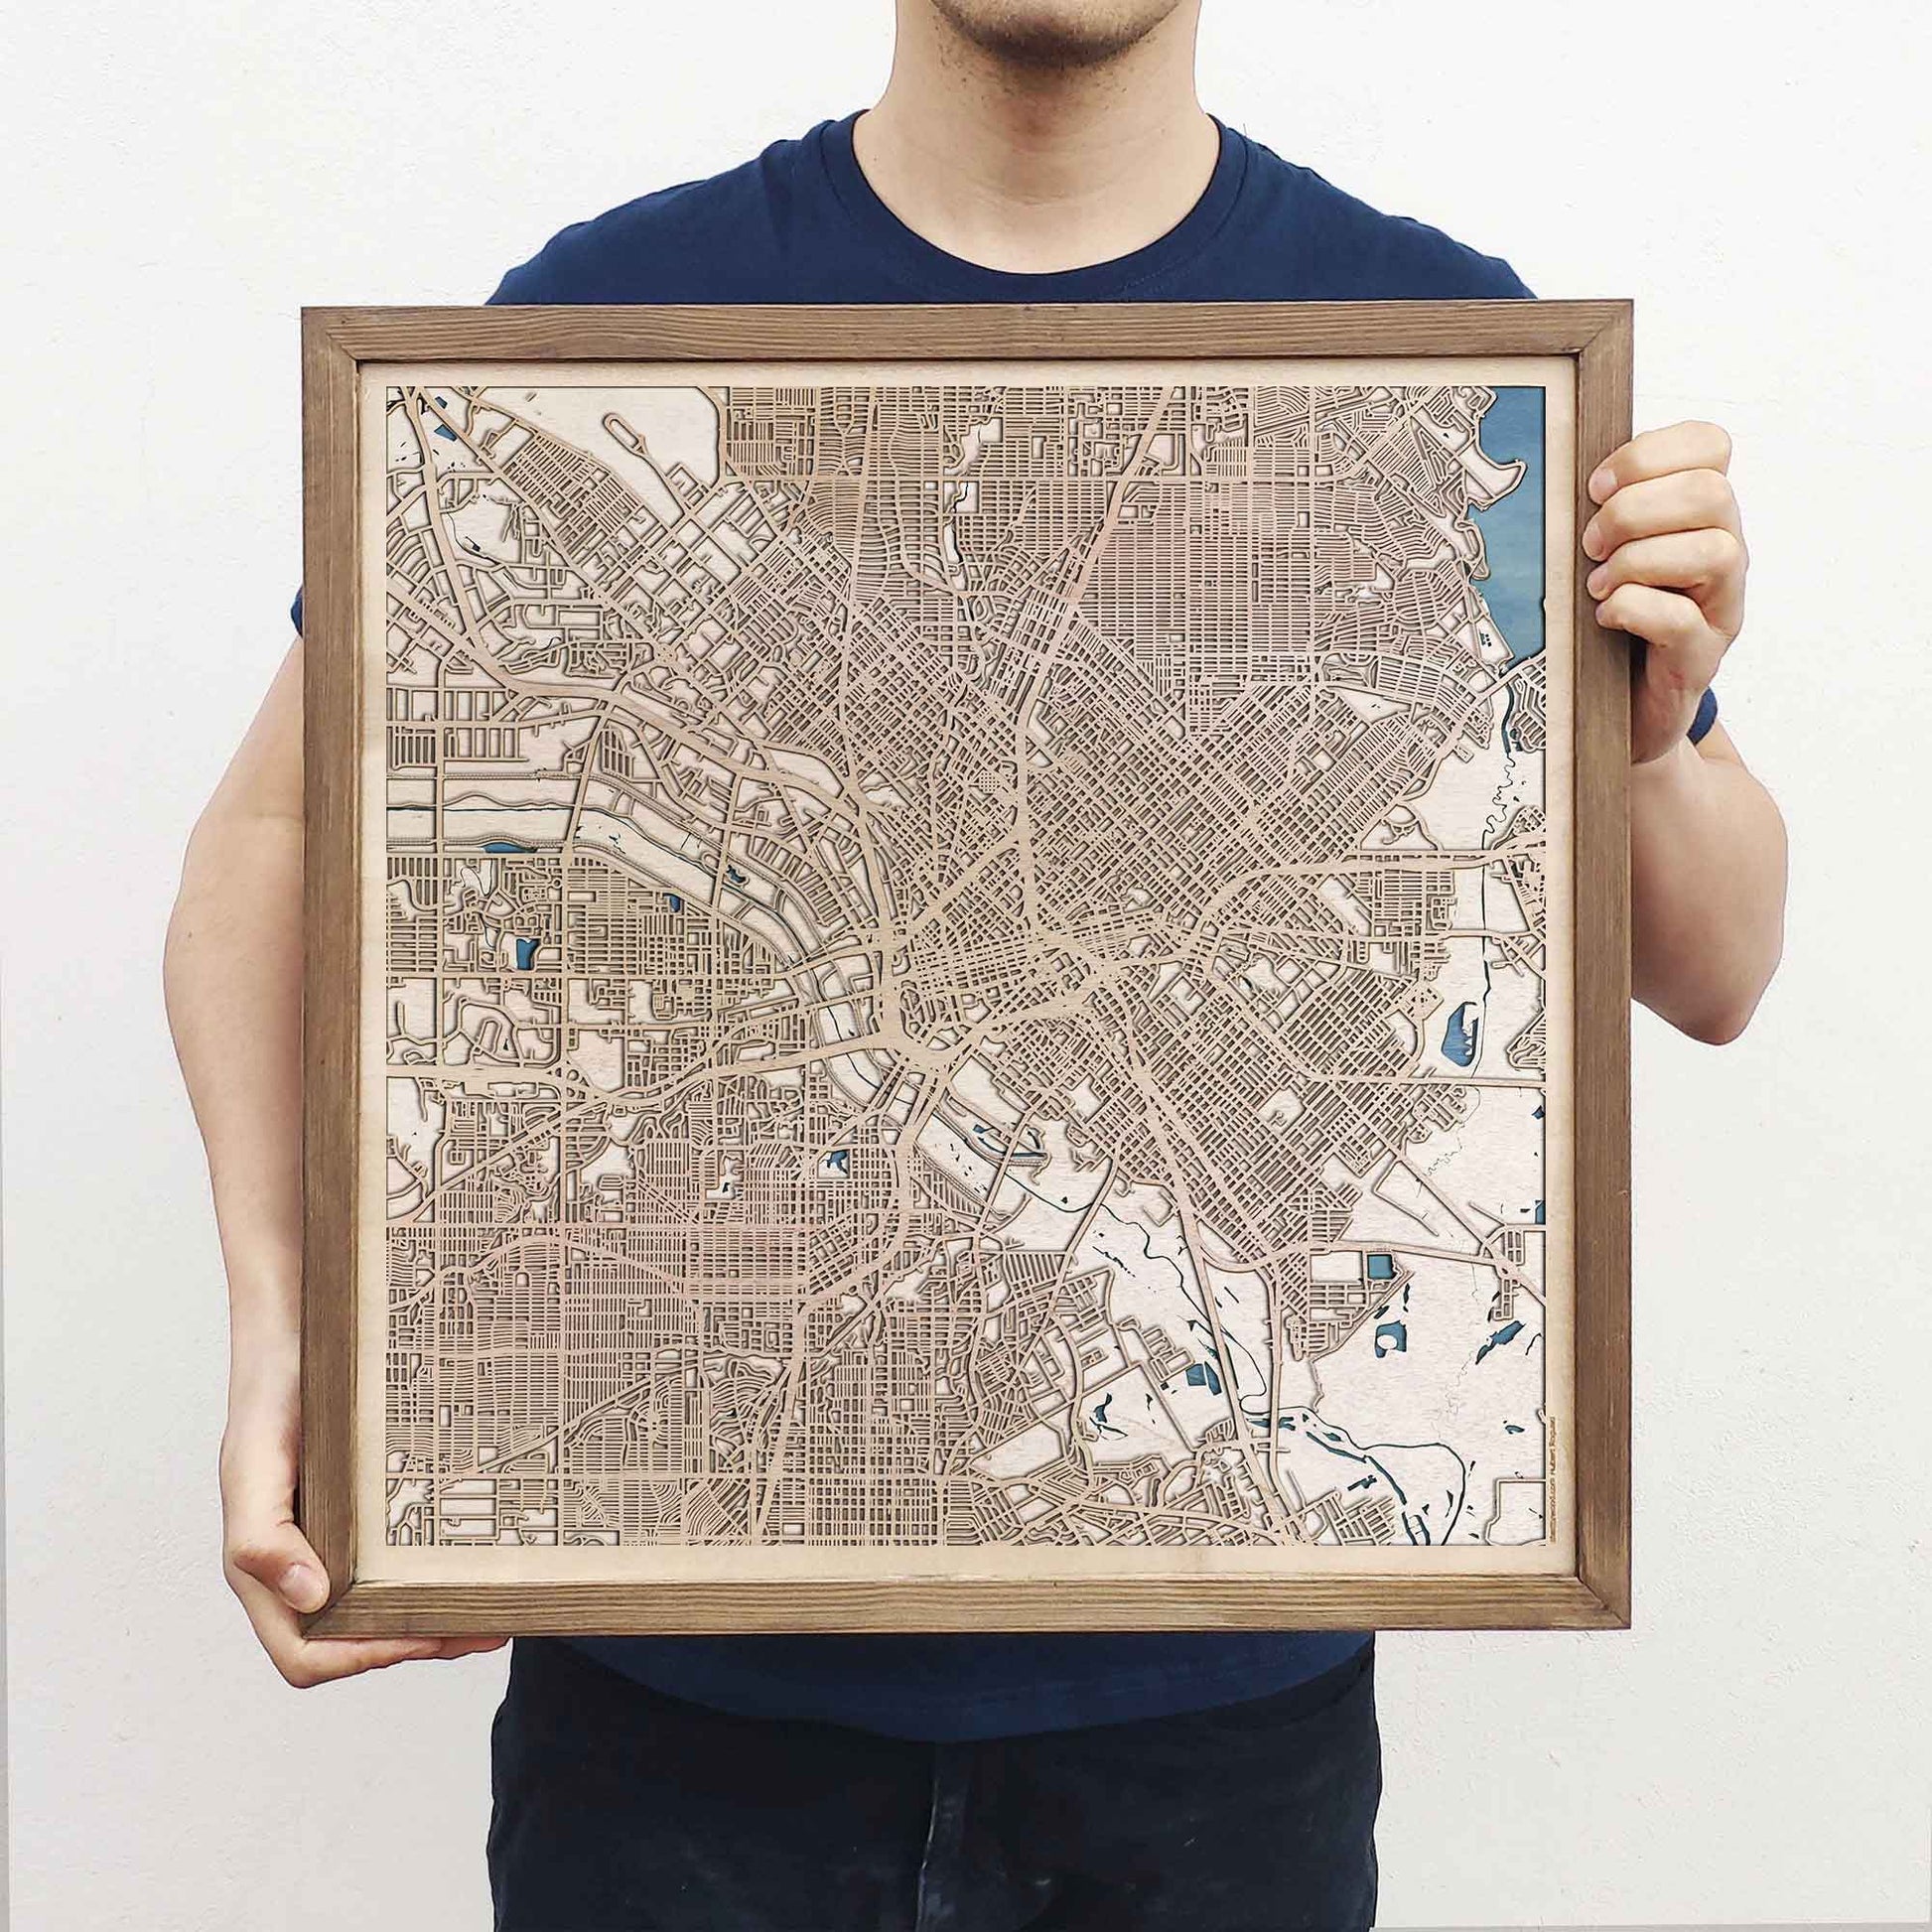 Dallas Wooden Map by CityWood - Custom Wood Map Art - Unique Laser Cut Engraved - Anniversary Gift